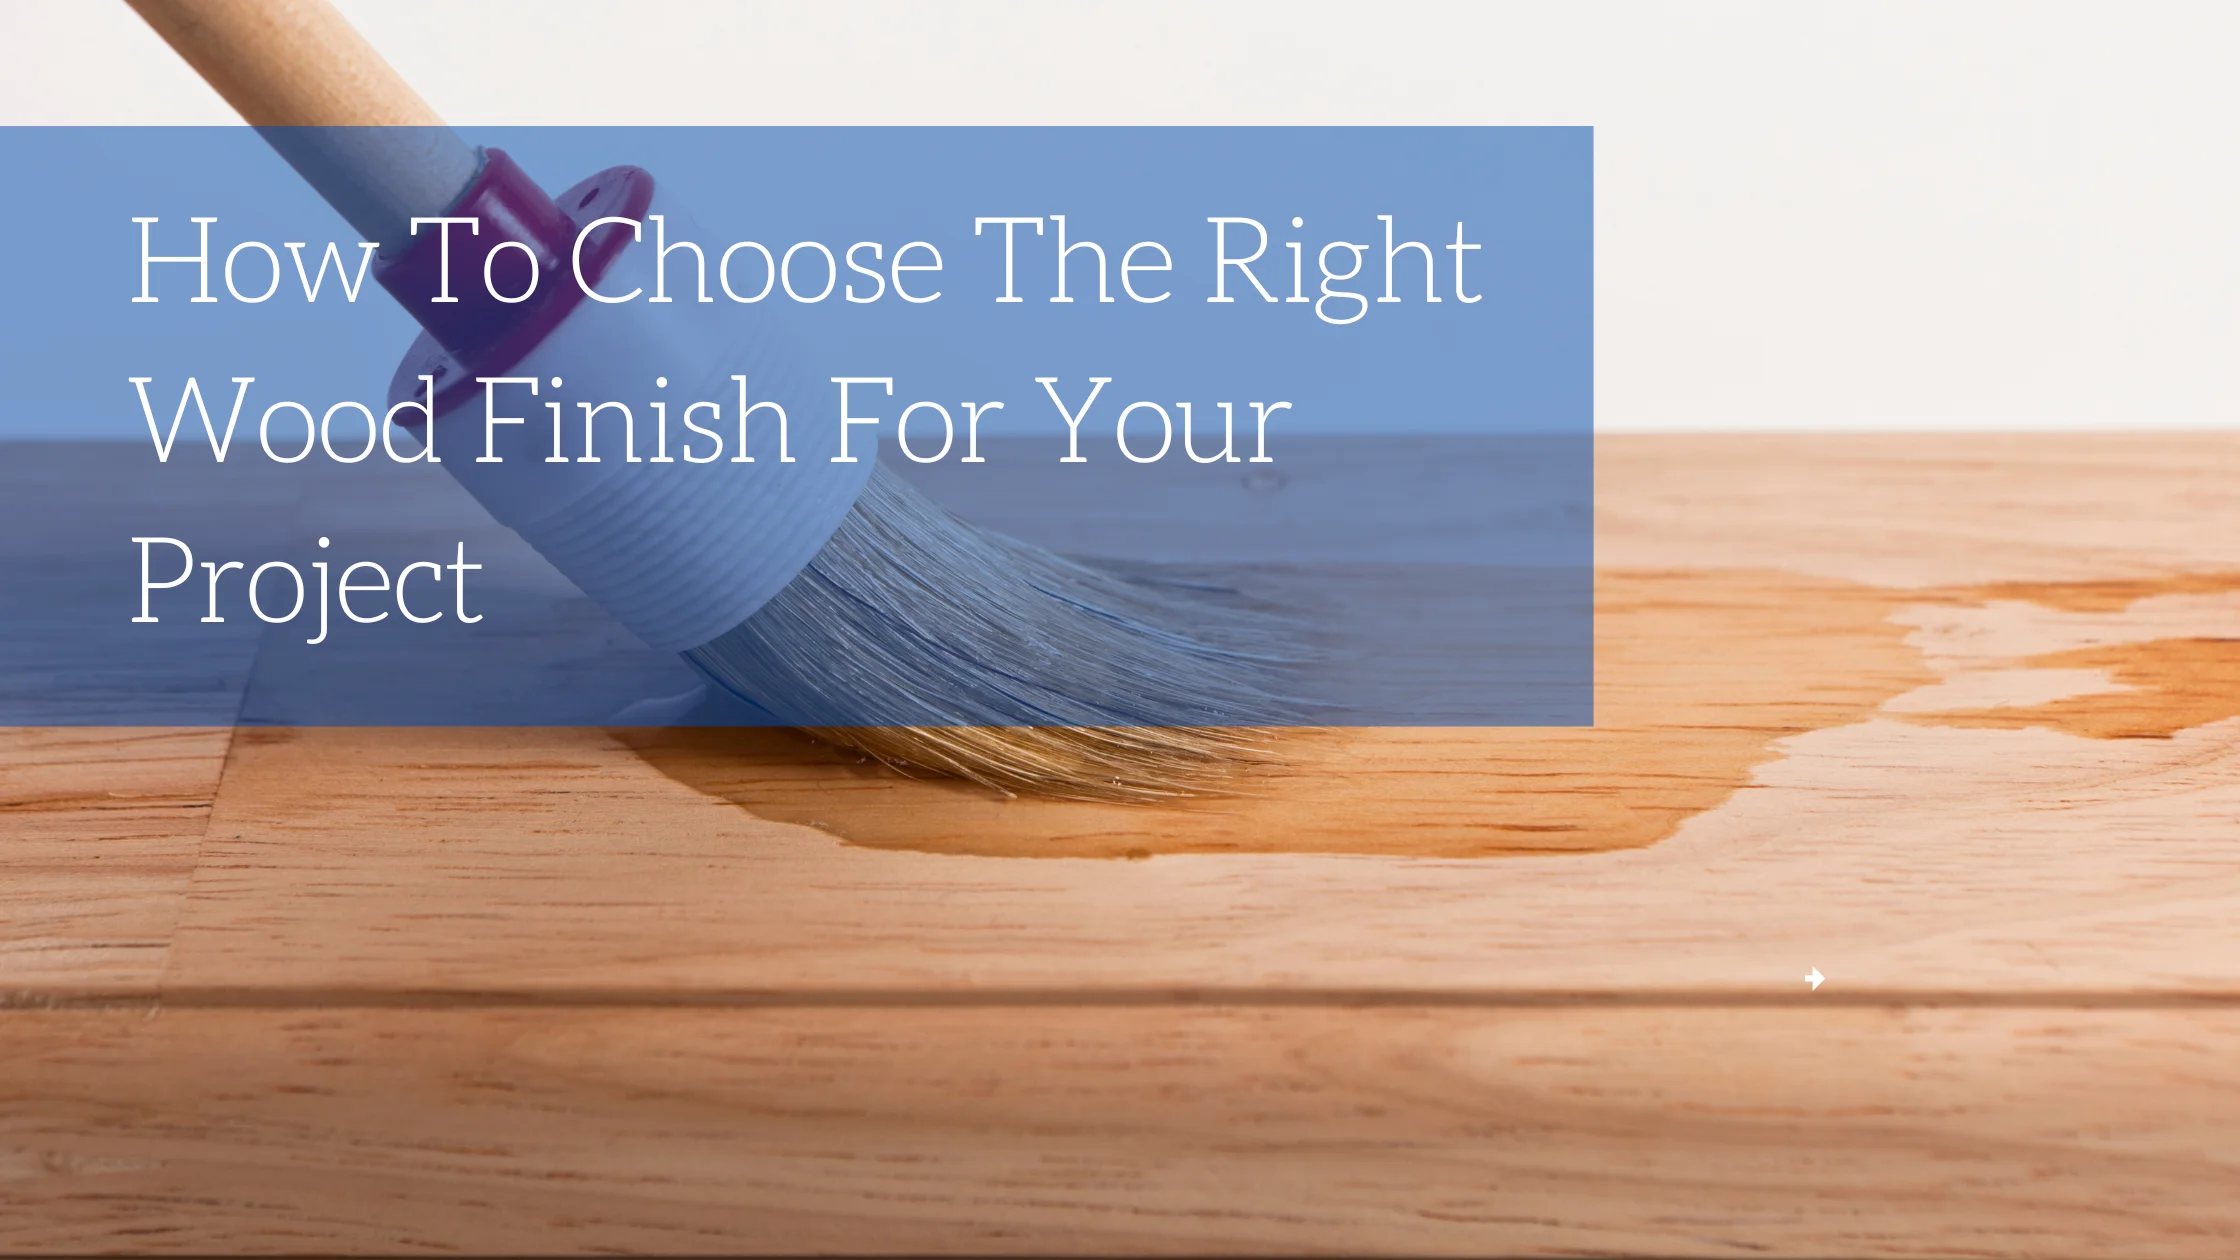 How To Choose The Right Wood Finish For Your Project